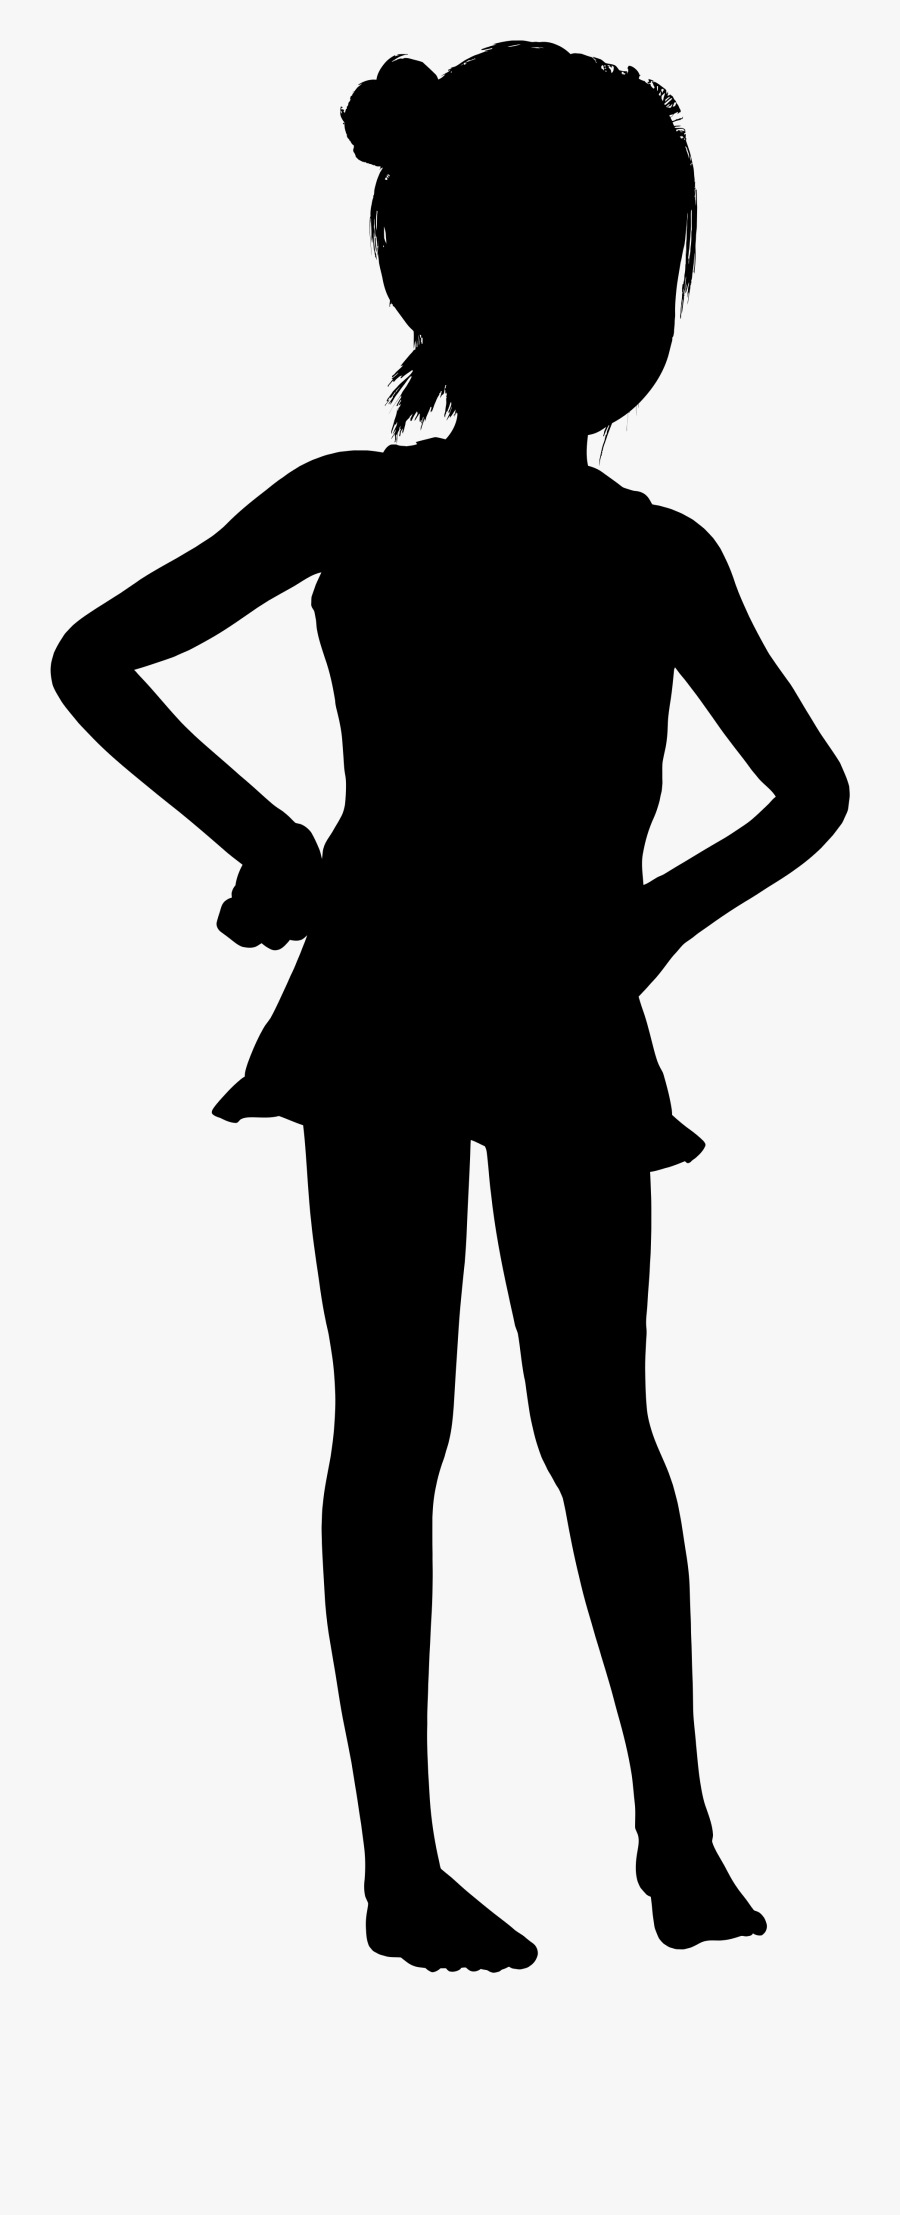 Girl With Hands On Hips Silhouette - Girl Silhouette, Transparent Clipart